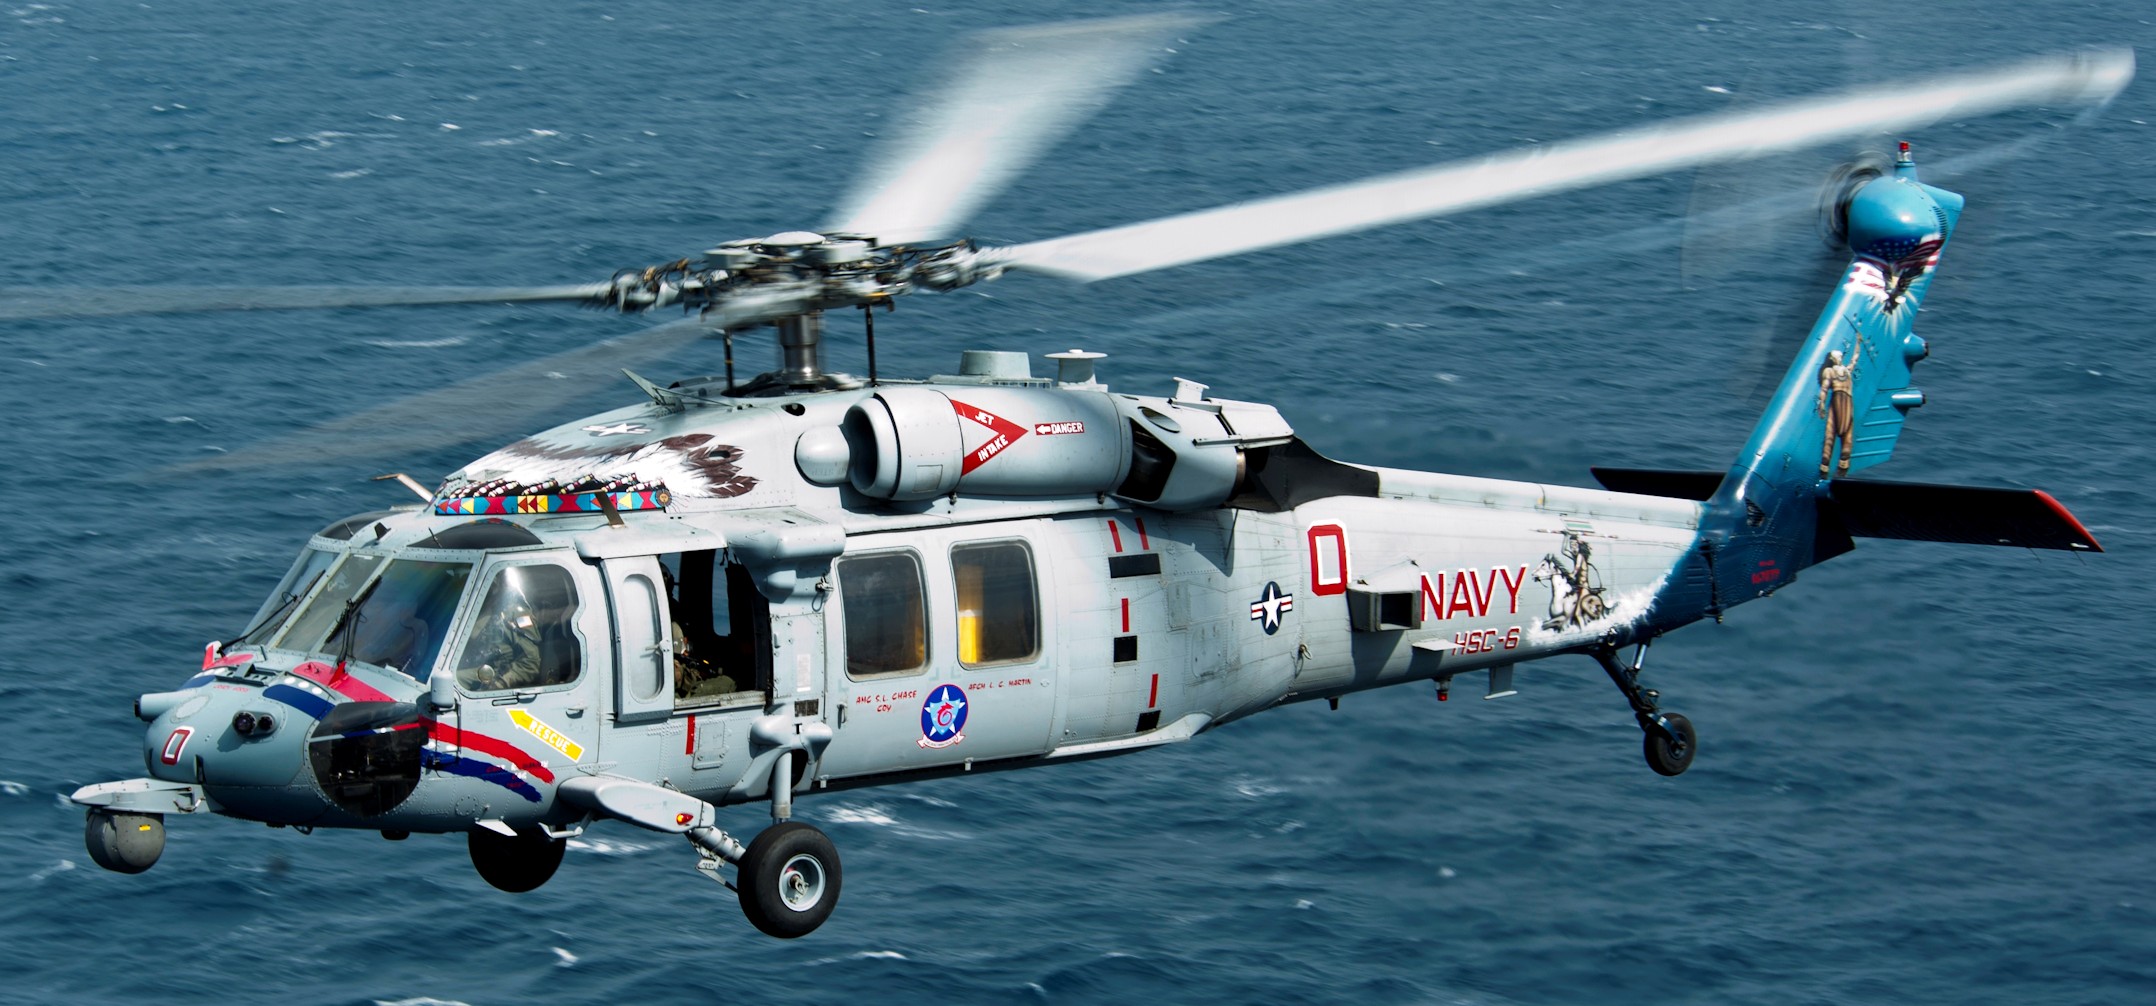 hsc-6 screamin indians helicopter sea combat squadron mh-60s seahawk us navy